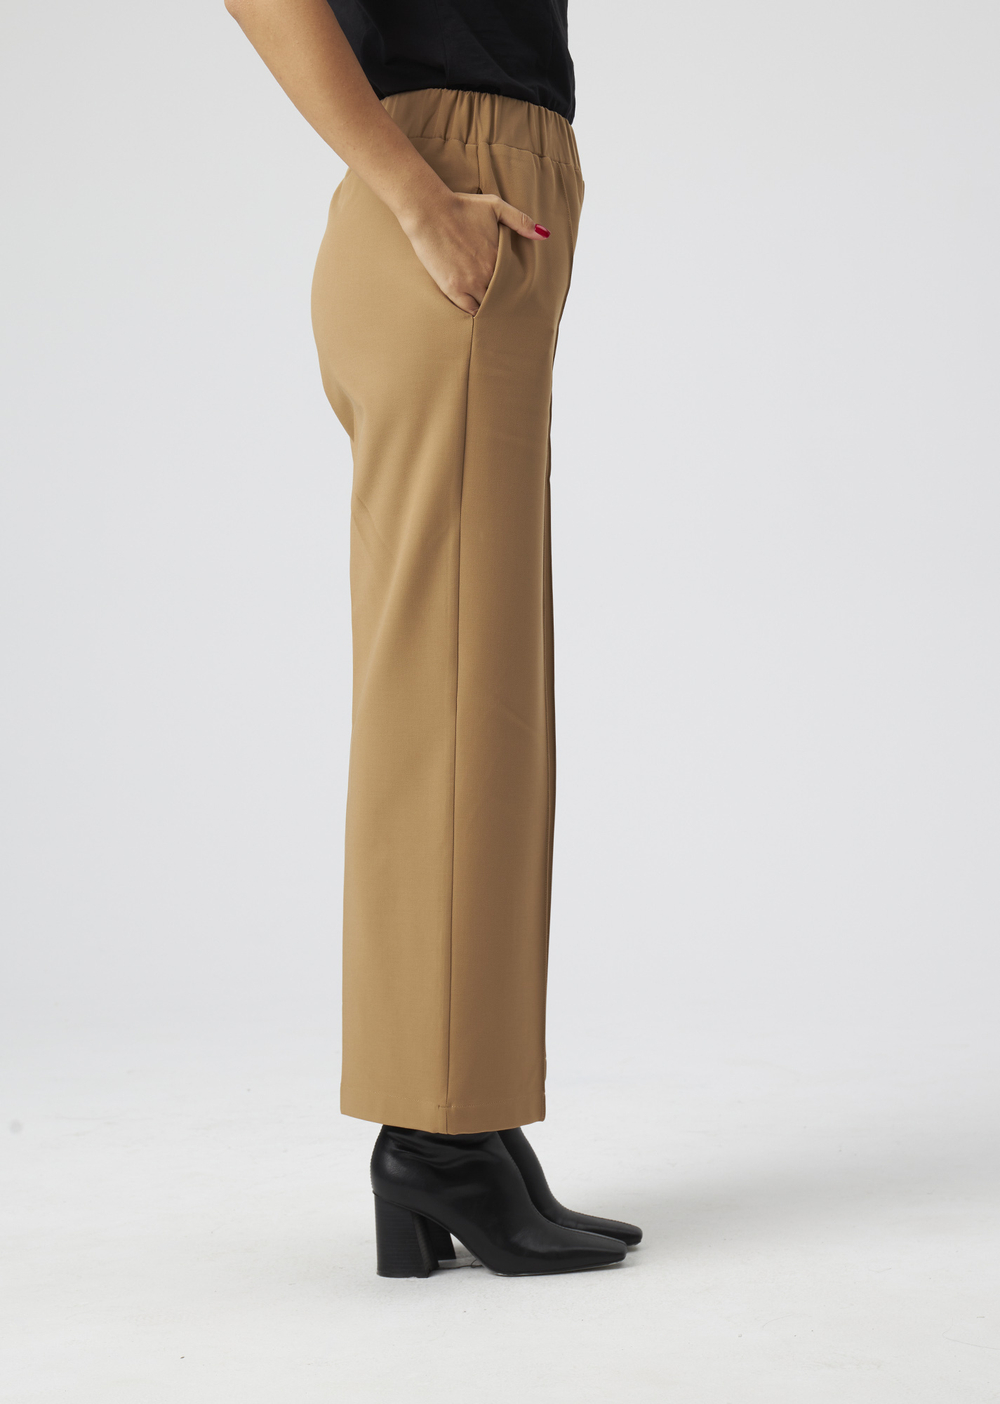 TROUSERS | S | BROWN